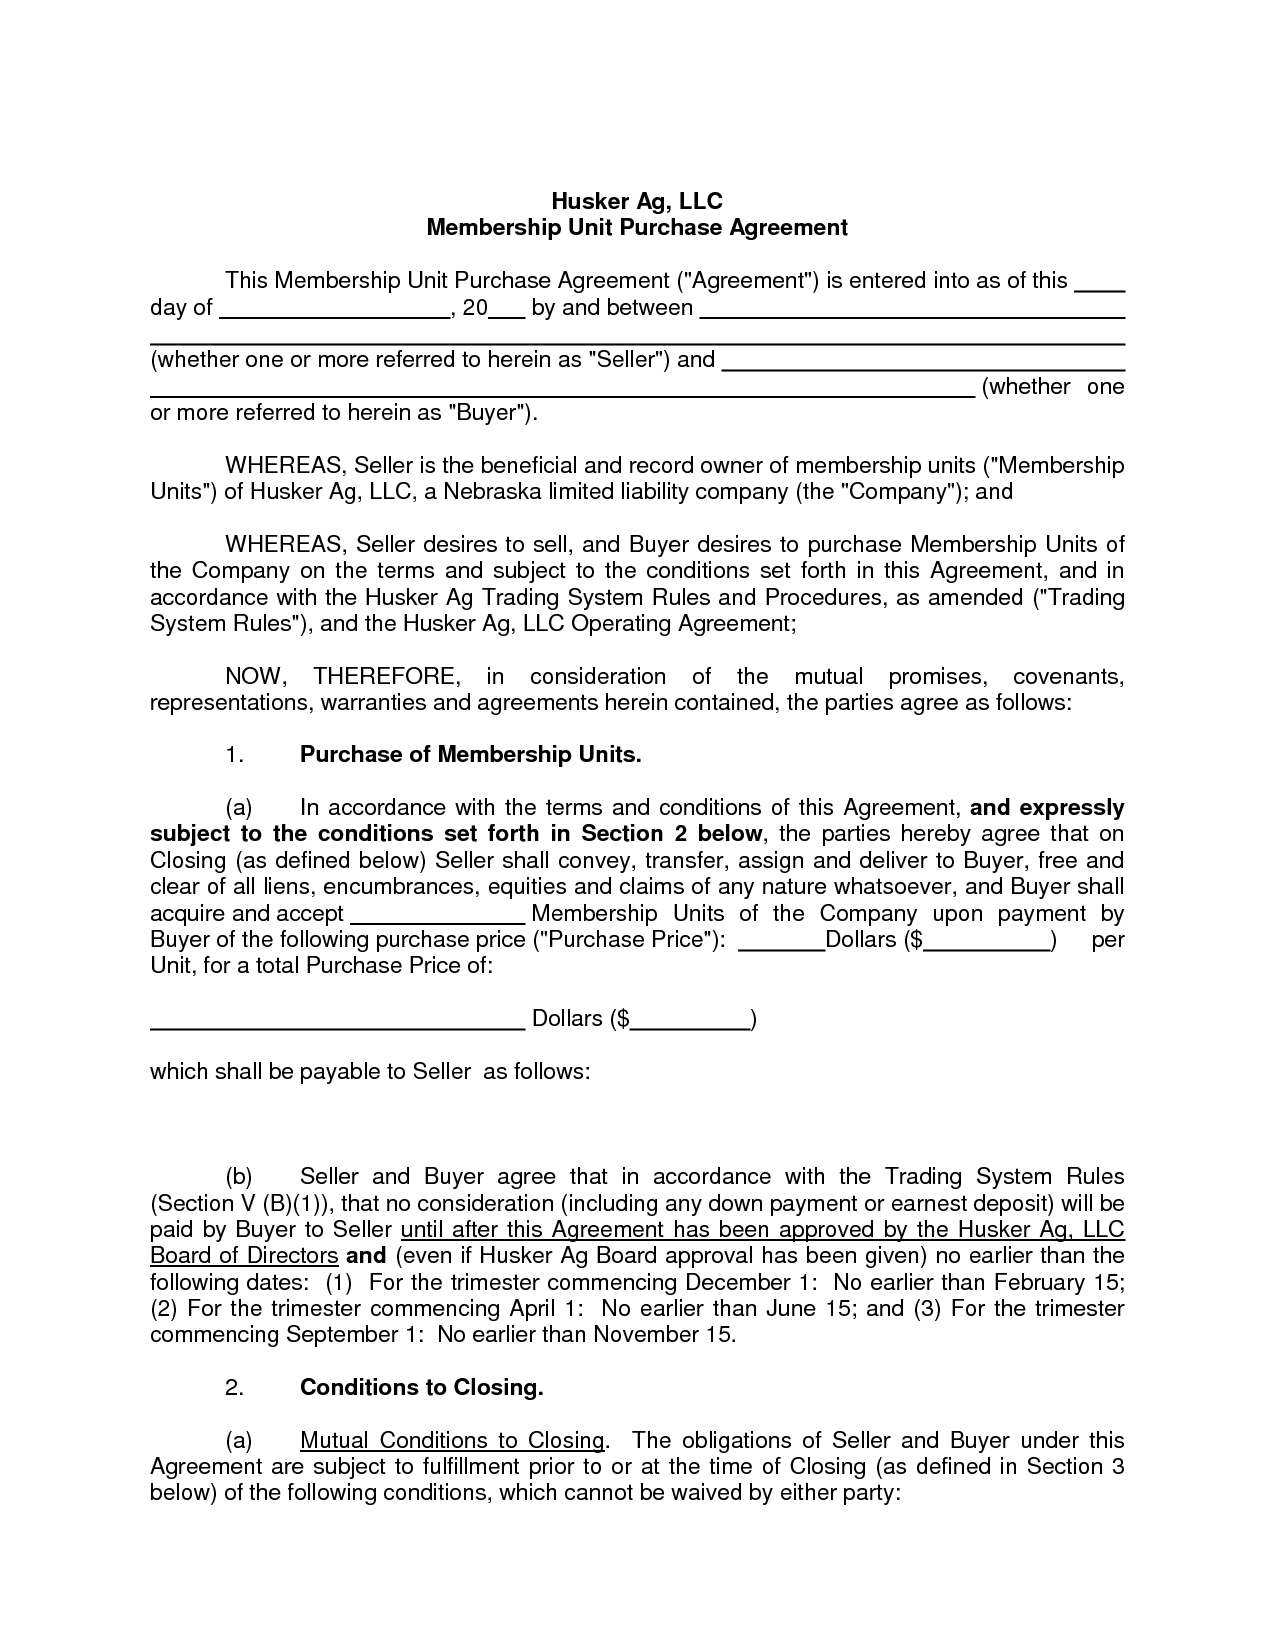 Sales Agreement Template Fresh Free Blank Purchase Agreement form 